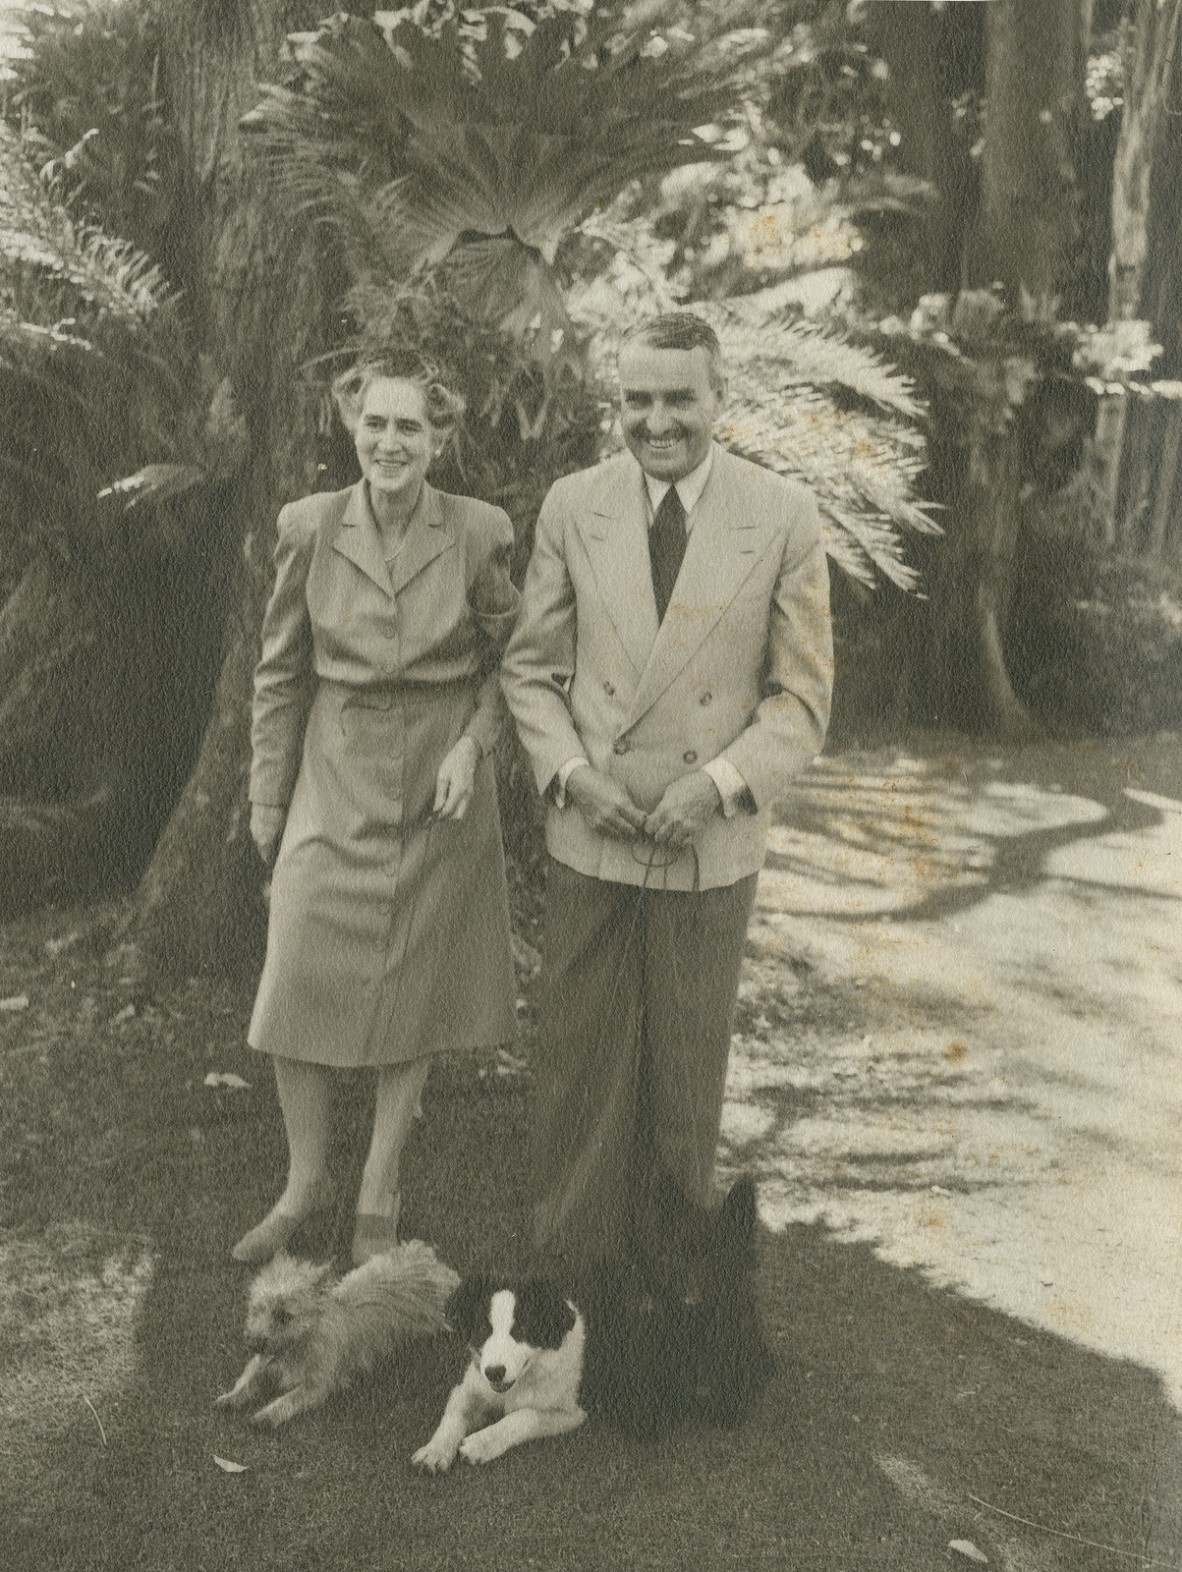 Sir John and Lady Lavarck walking their dogs in the grounds of Government House Brisbane